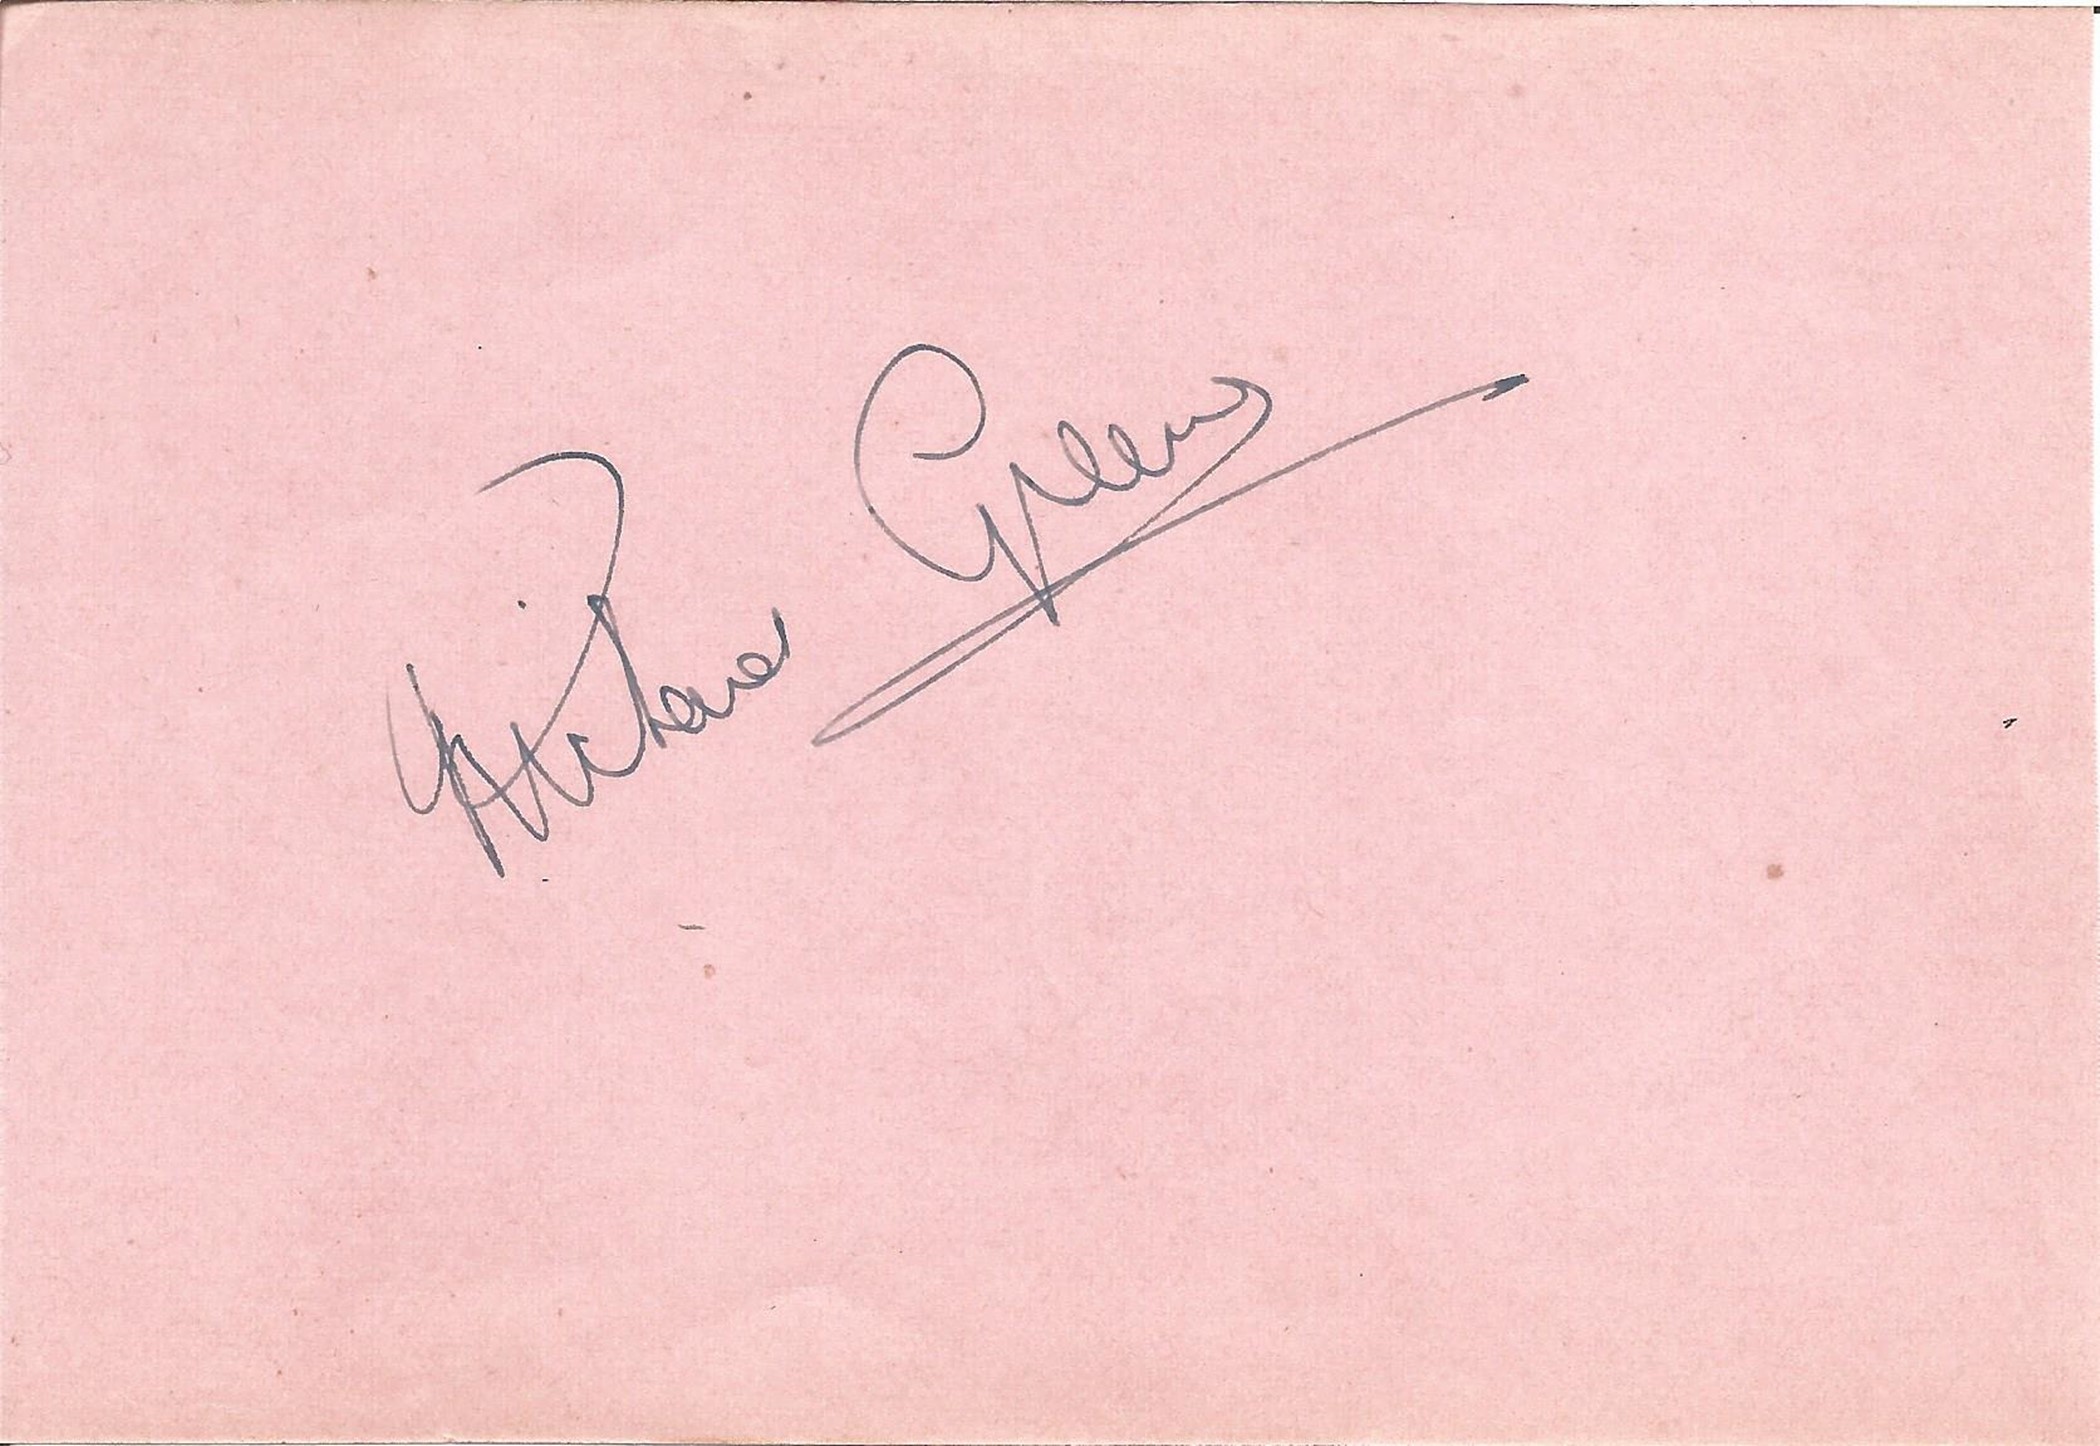 Richard Greene, actor. A signed 5.5x4 album page with an early unsigned photo. He appeared in many